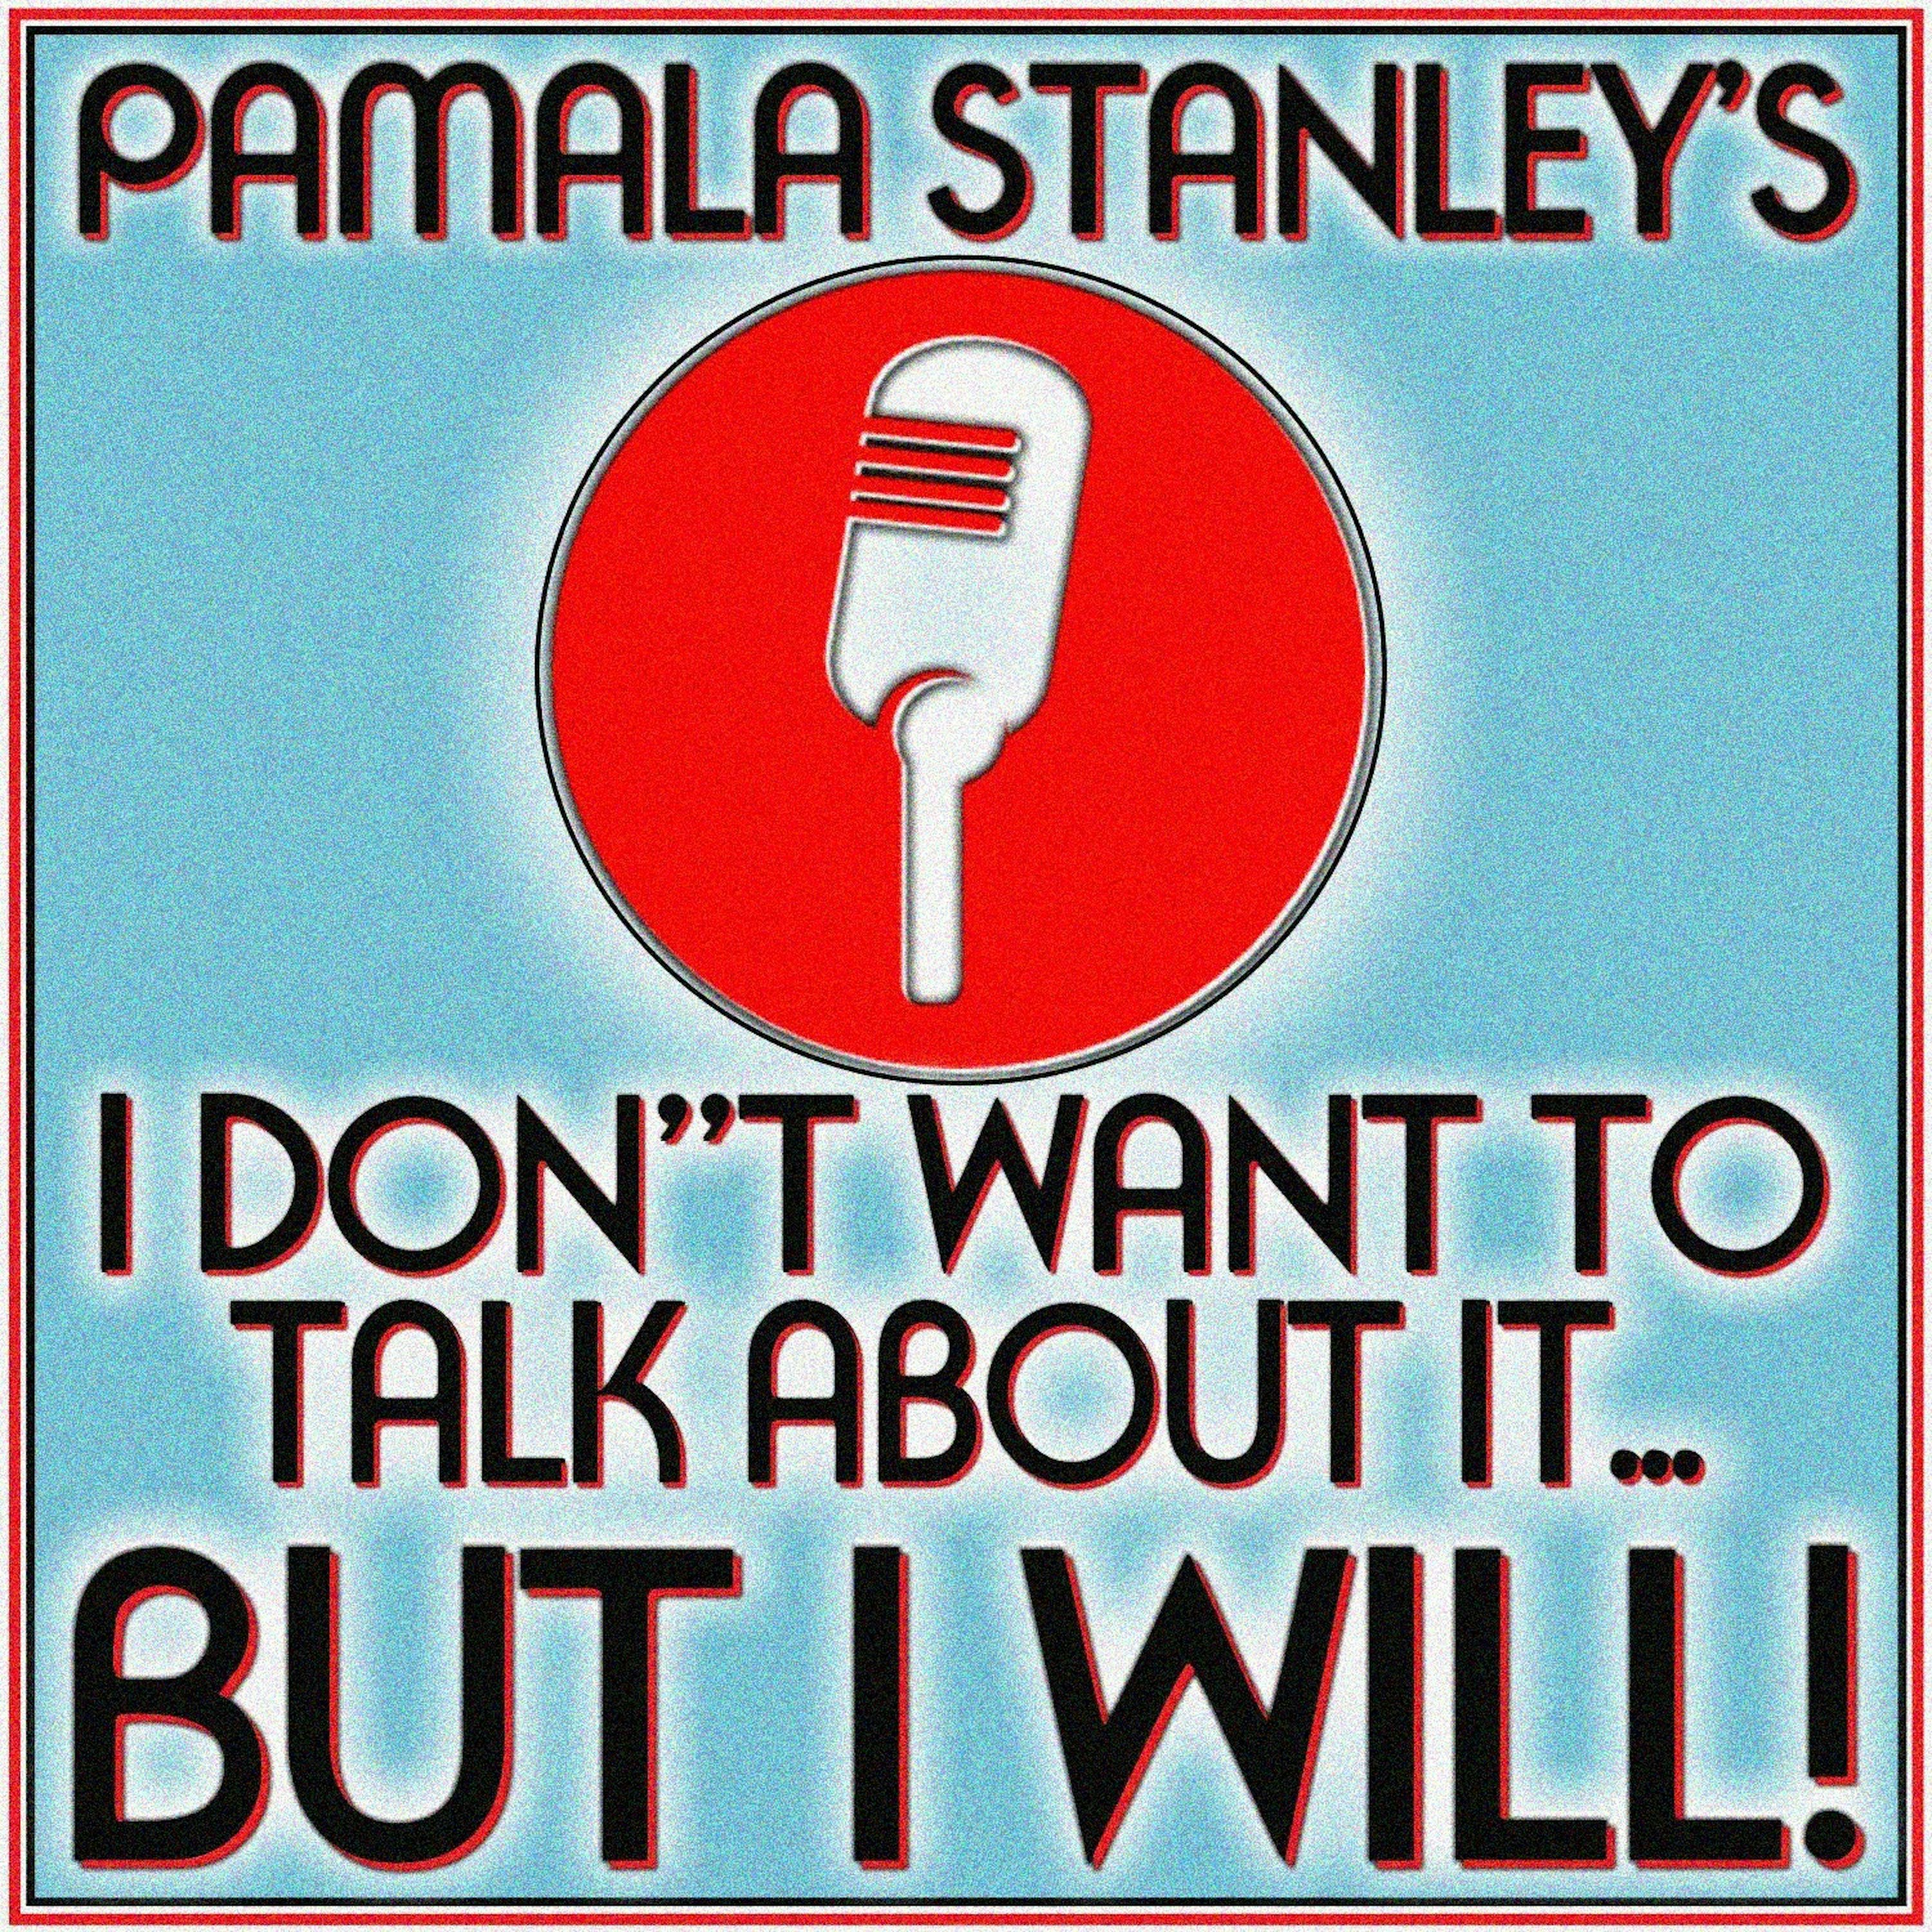 [BLOCKED] 04-17-15 - I DON'T WANT TO TALK ABOUT IT... BUT I WILL! - w Pamala Stanley